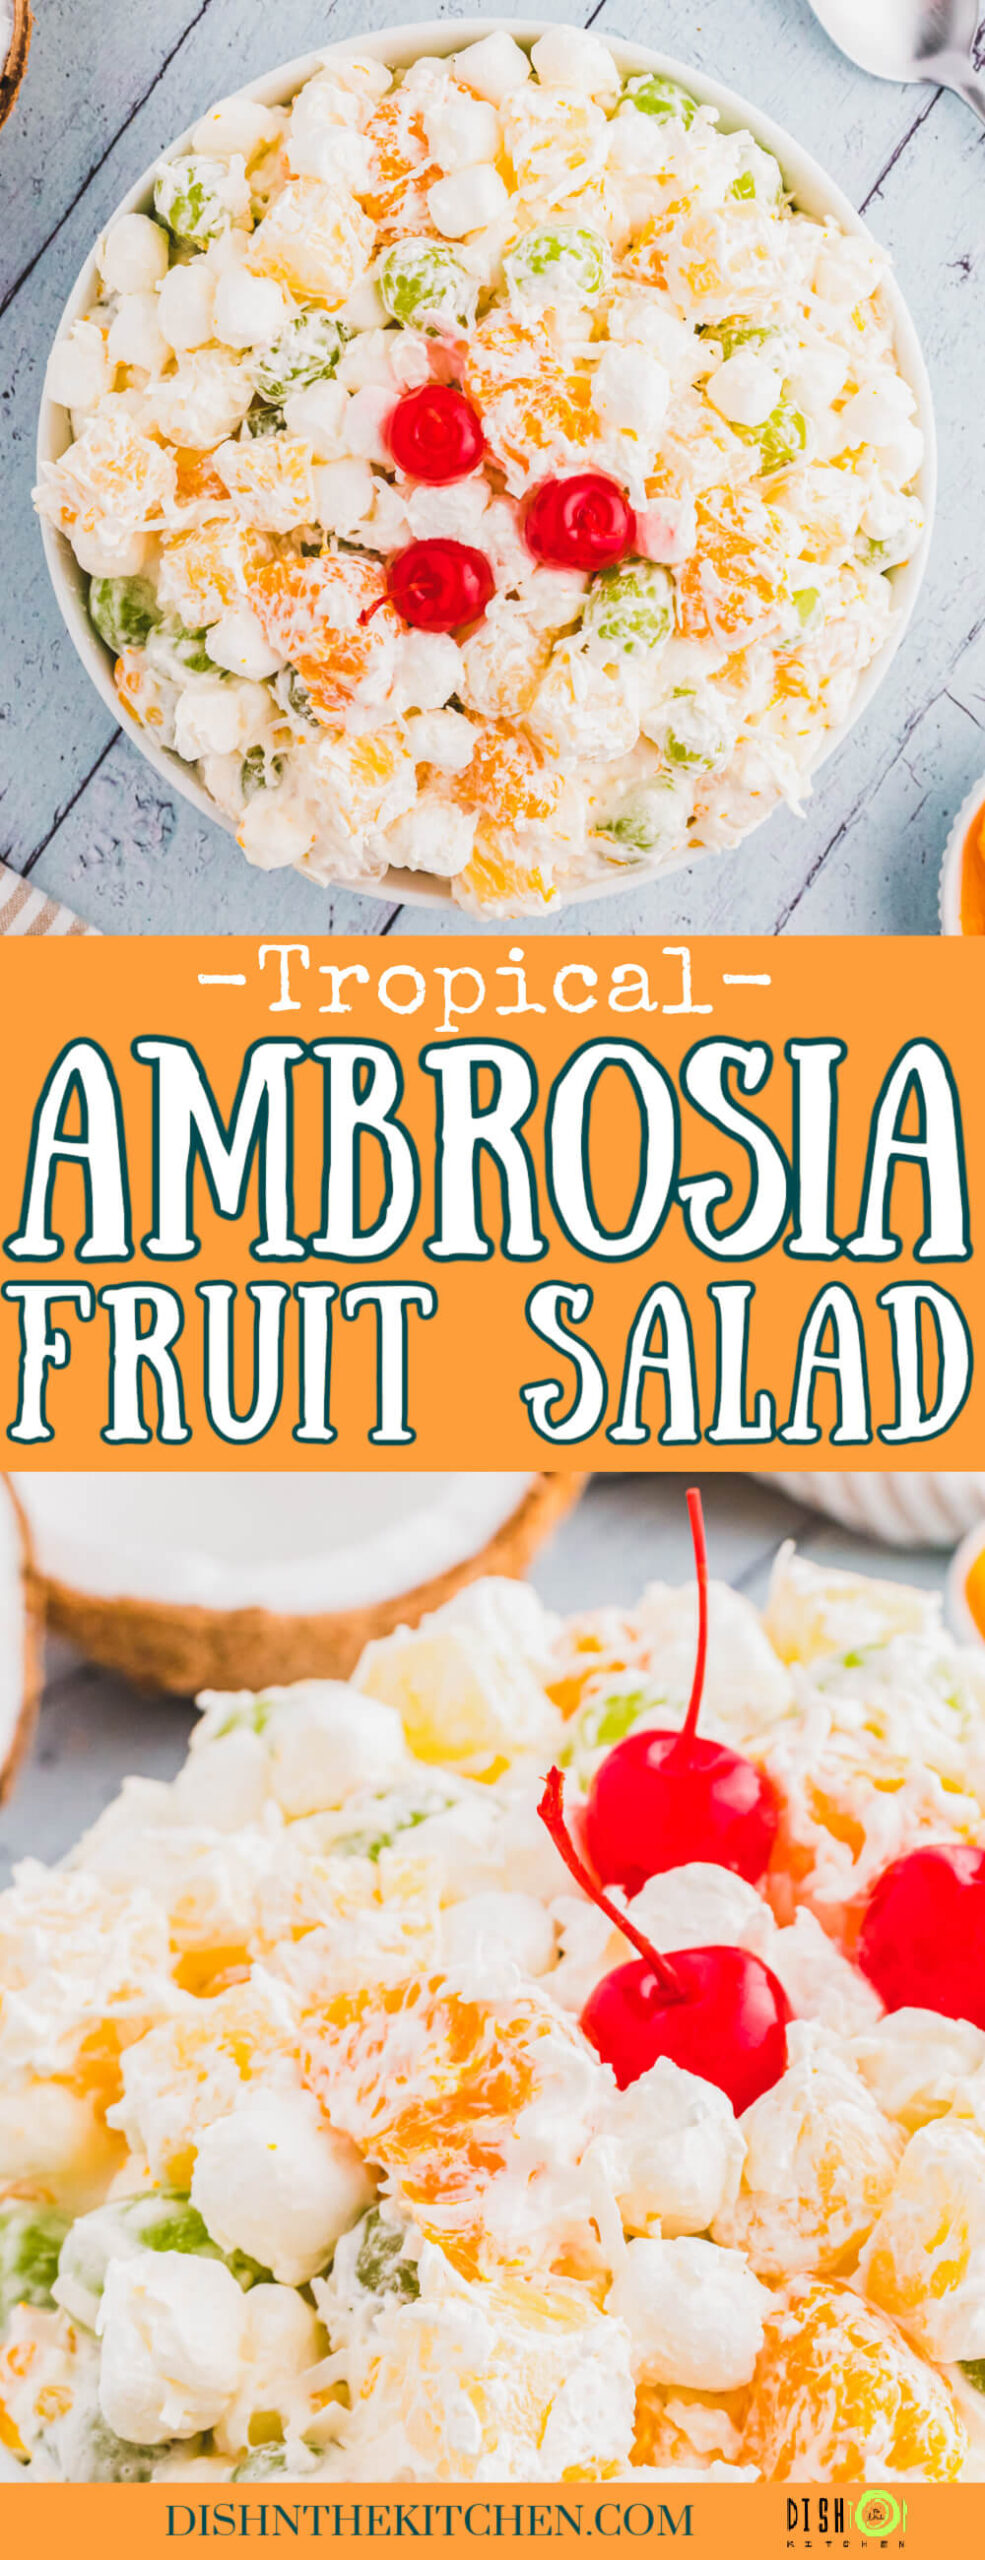 Pinterest image featuring bowls of Ambrosia fruit salad garnished with bright red maraschino cherries.